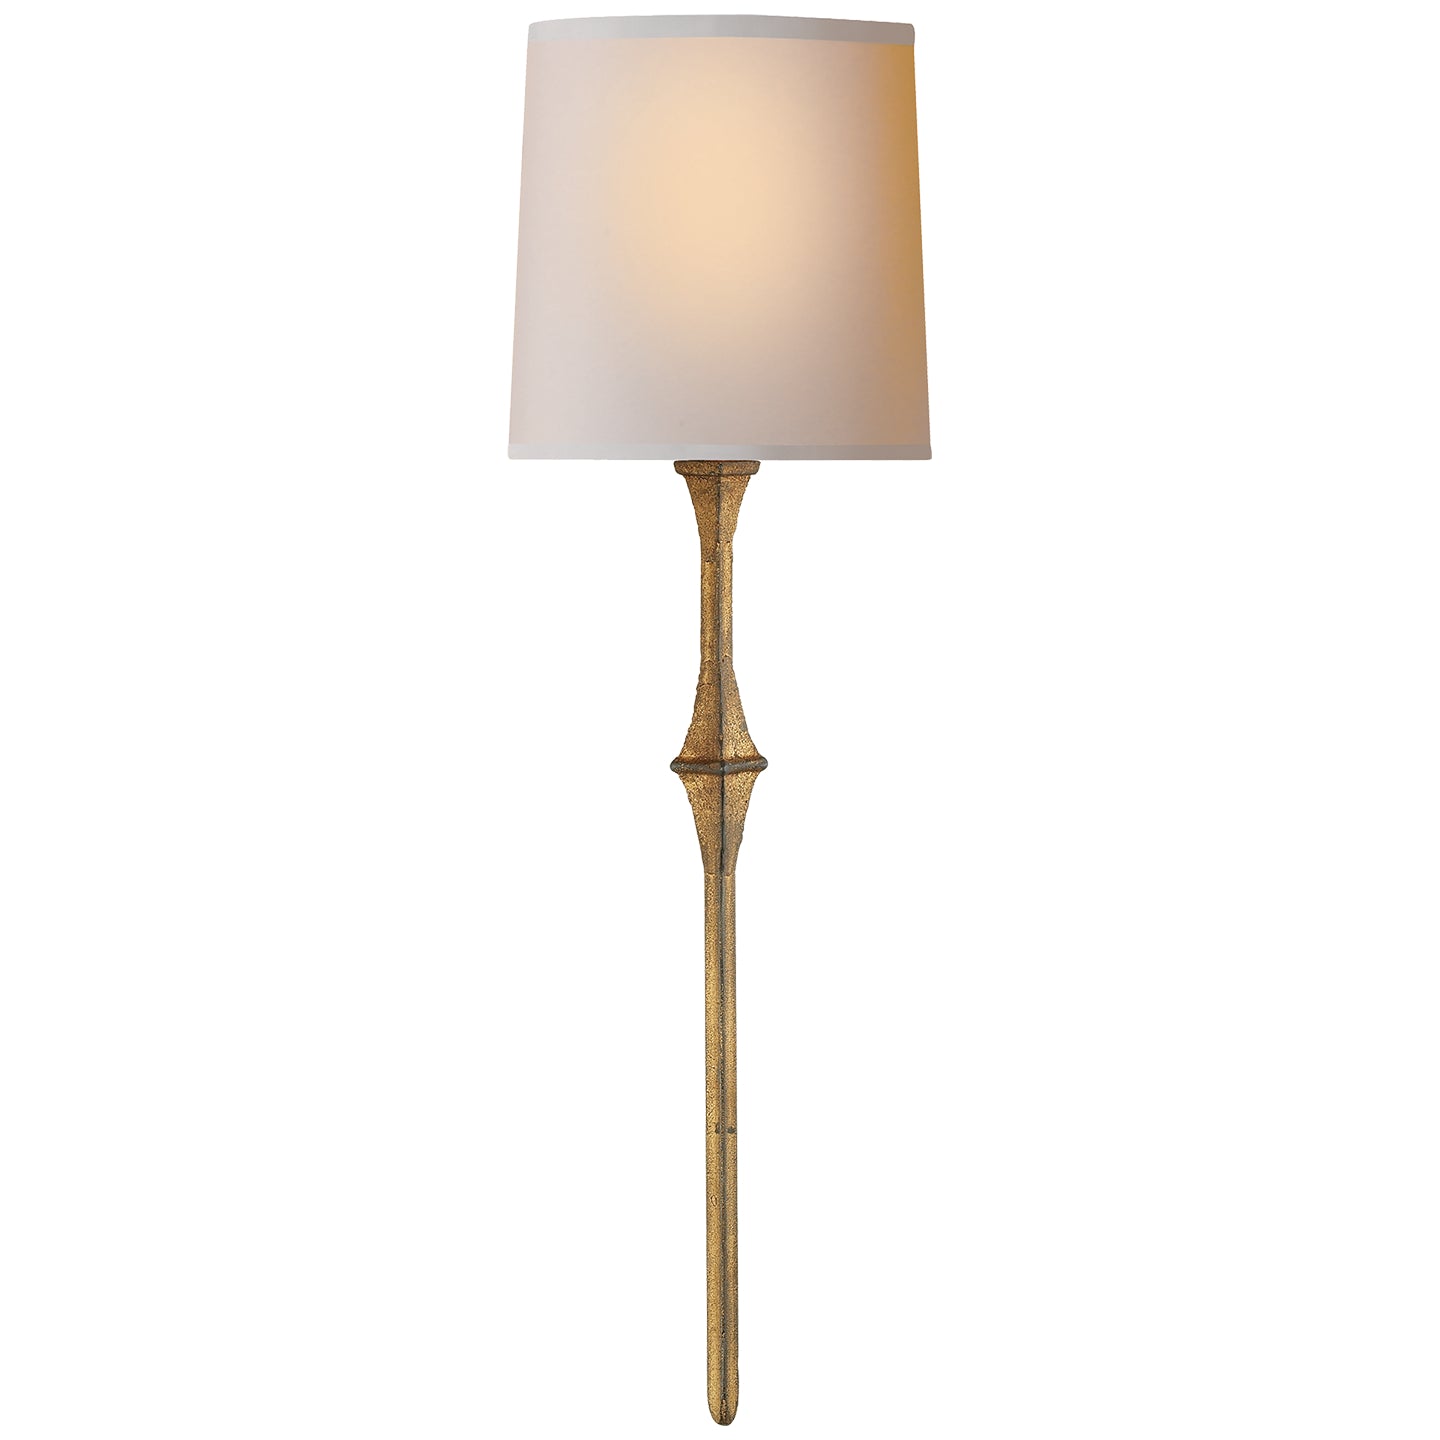 Load image into Gallery viewer, Visual Comfort Signature - S 2401GI-NP - One Light Wall Sconce - dauphine - Gilded Iron
